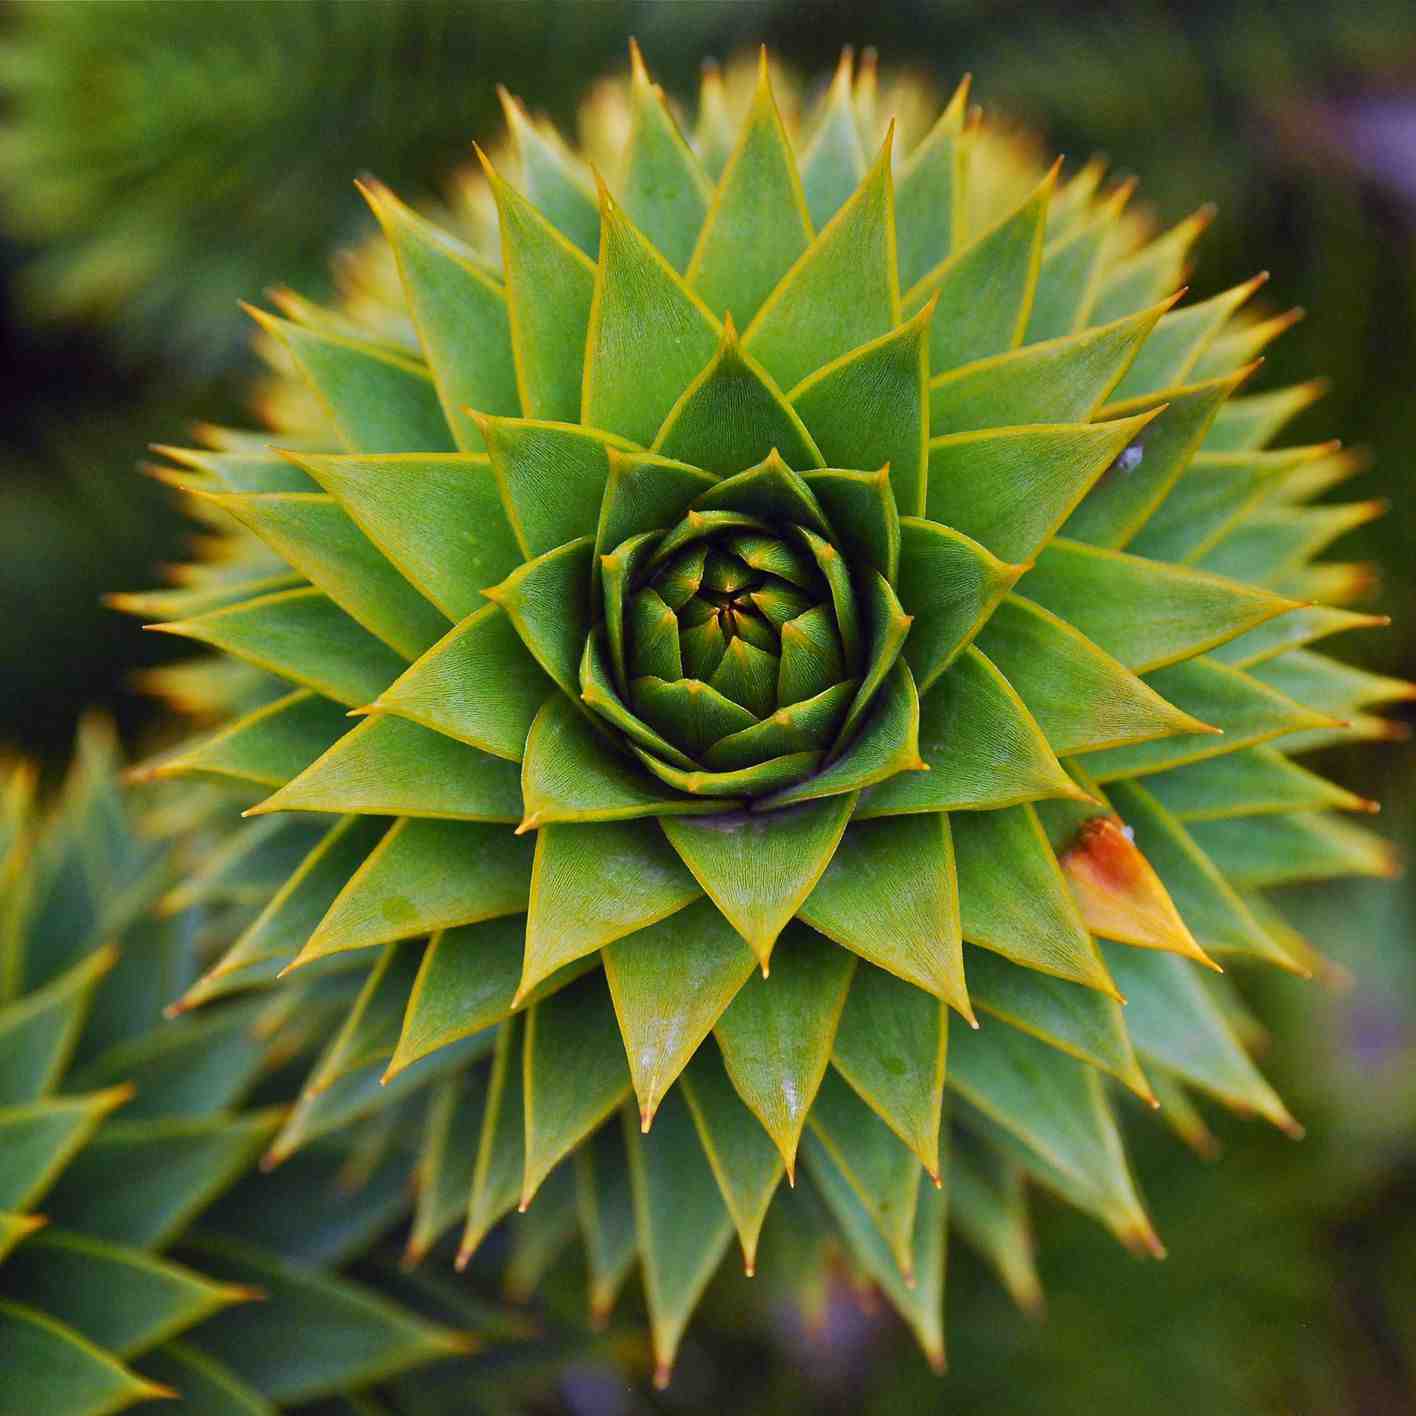 What are examples of fractals in nature?